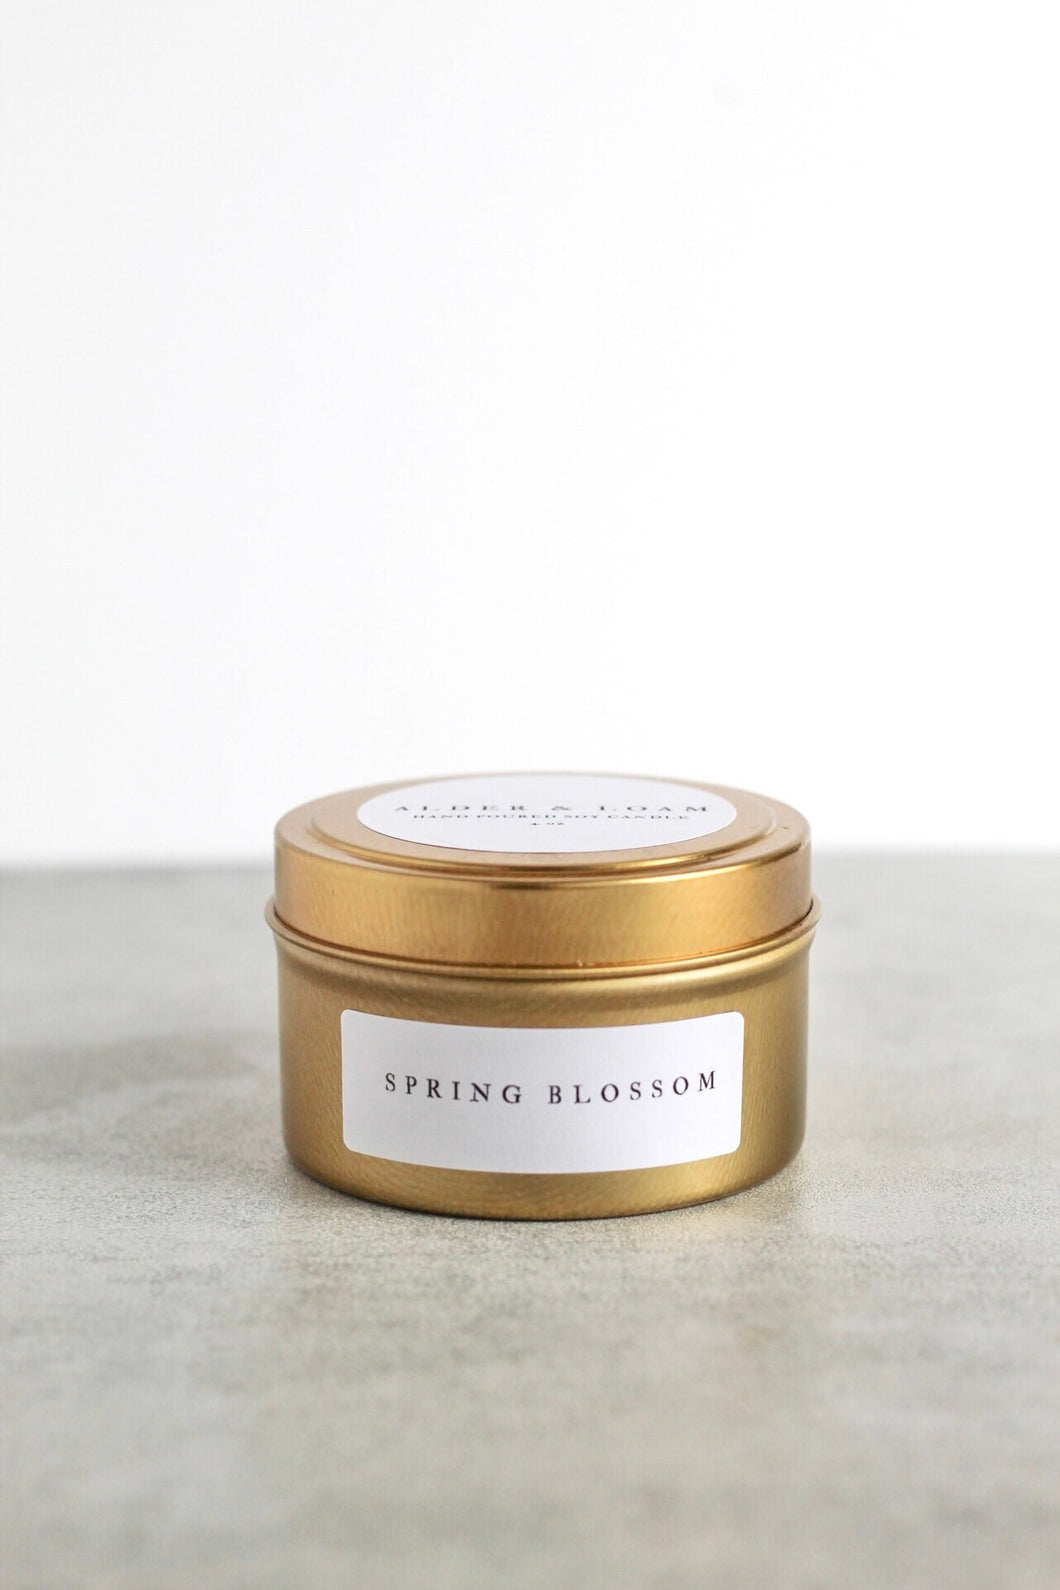 Spring Blossom Soy Candle,  Hand Poured, Natural, Eco Friendly, Floral Scent, 4 oz tin